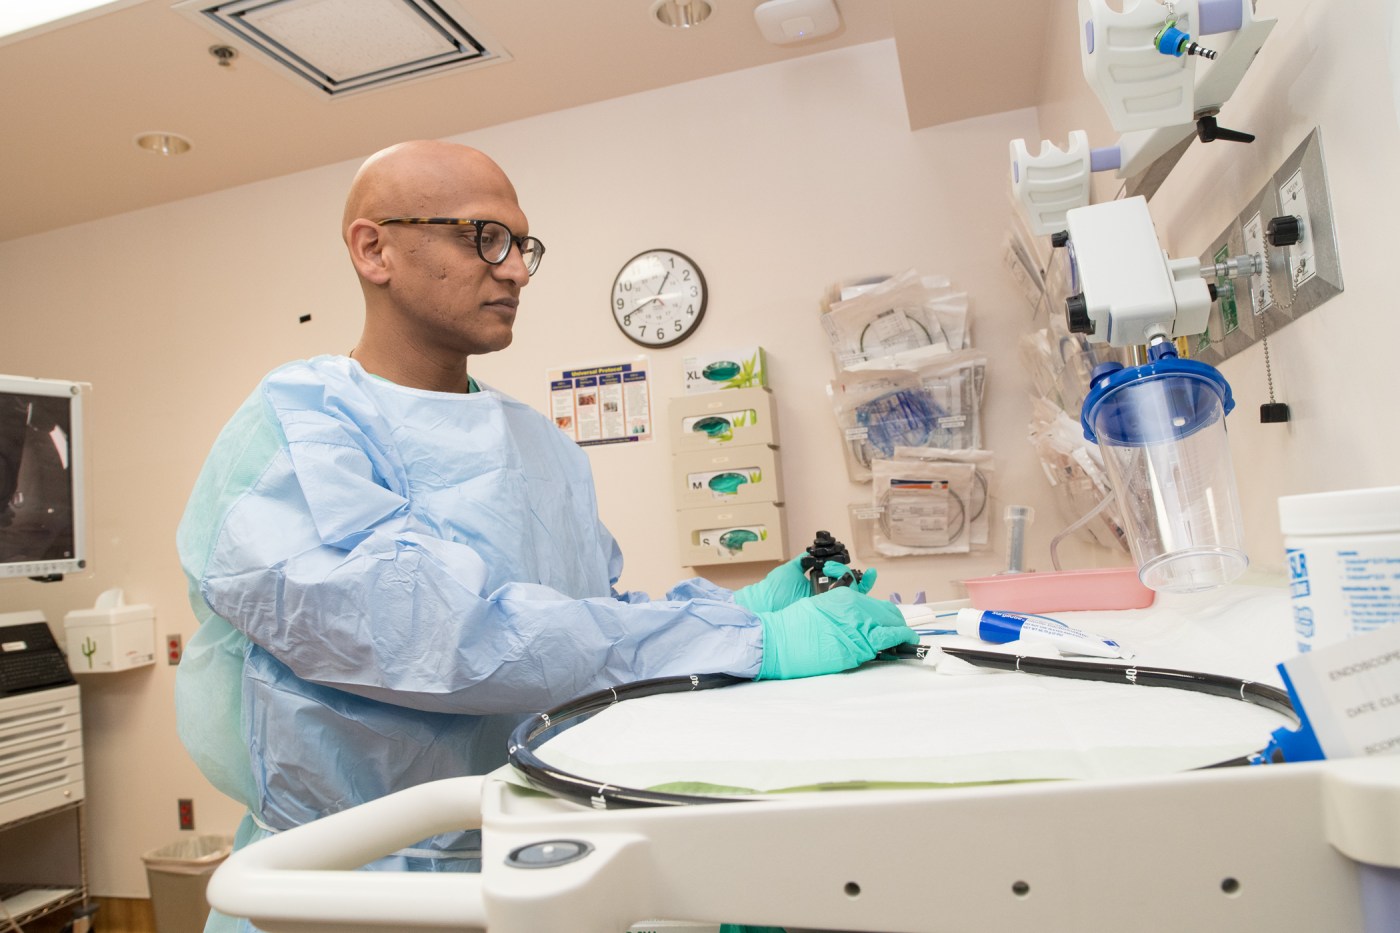 Study co-author Dr. Samir Gupta, chief of gastroenterology at the VA San Diego Healthcare System, says some patients and primary care providers misunderstand the results of abnormal stool blood screening tests.